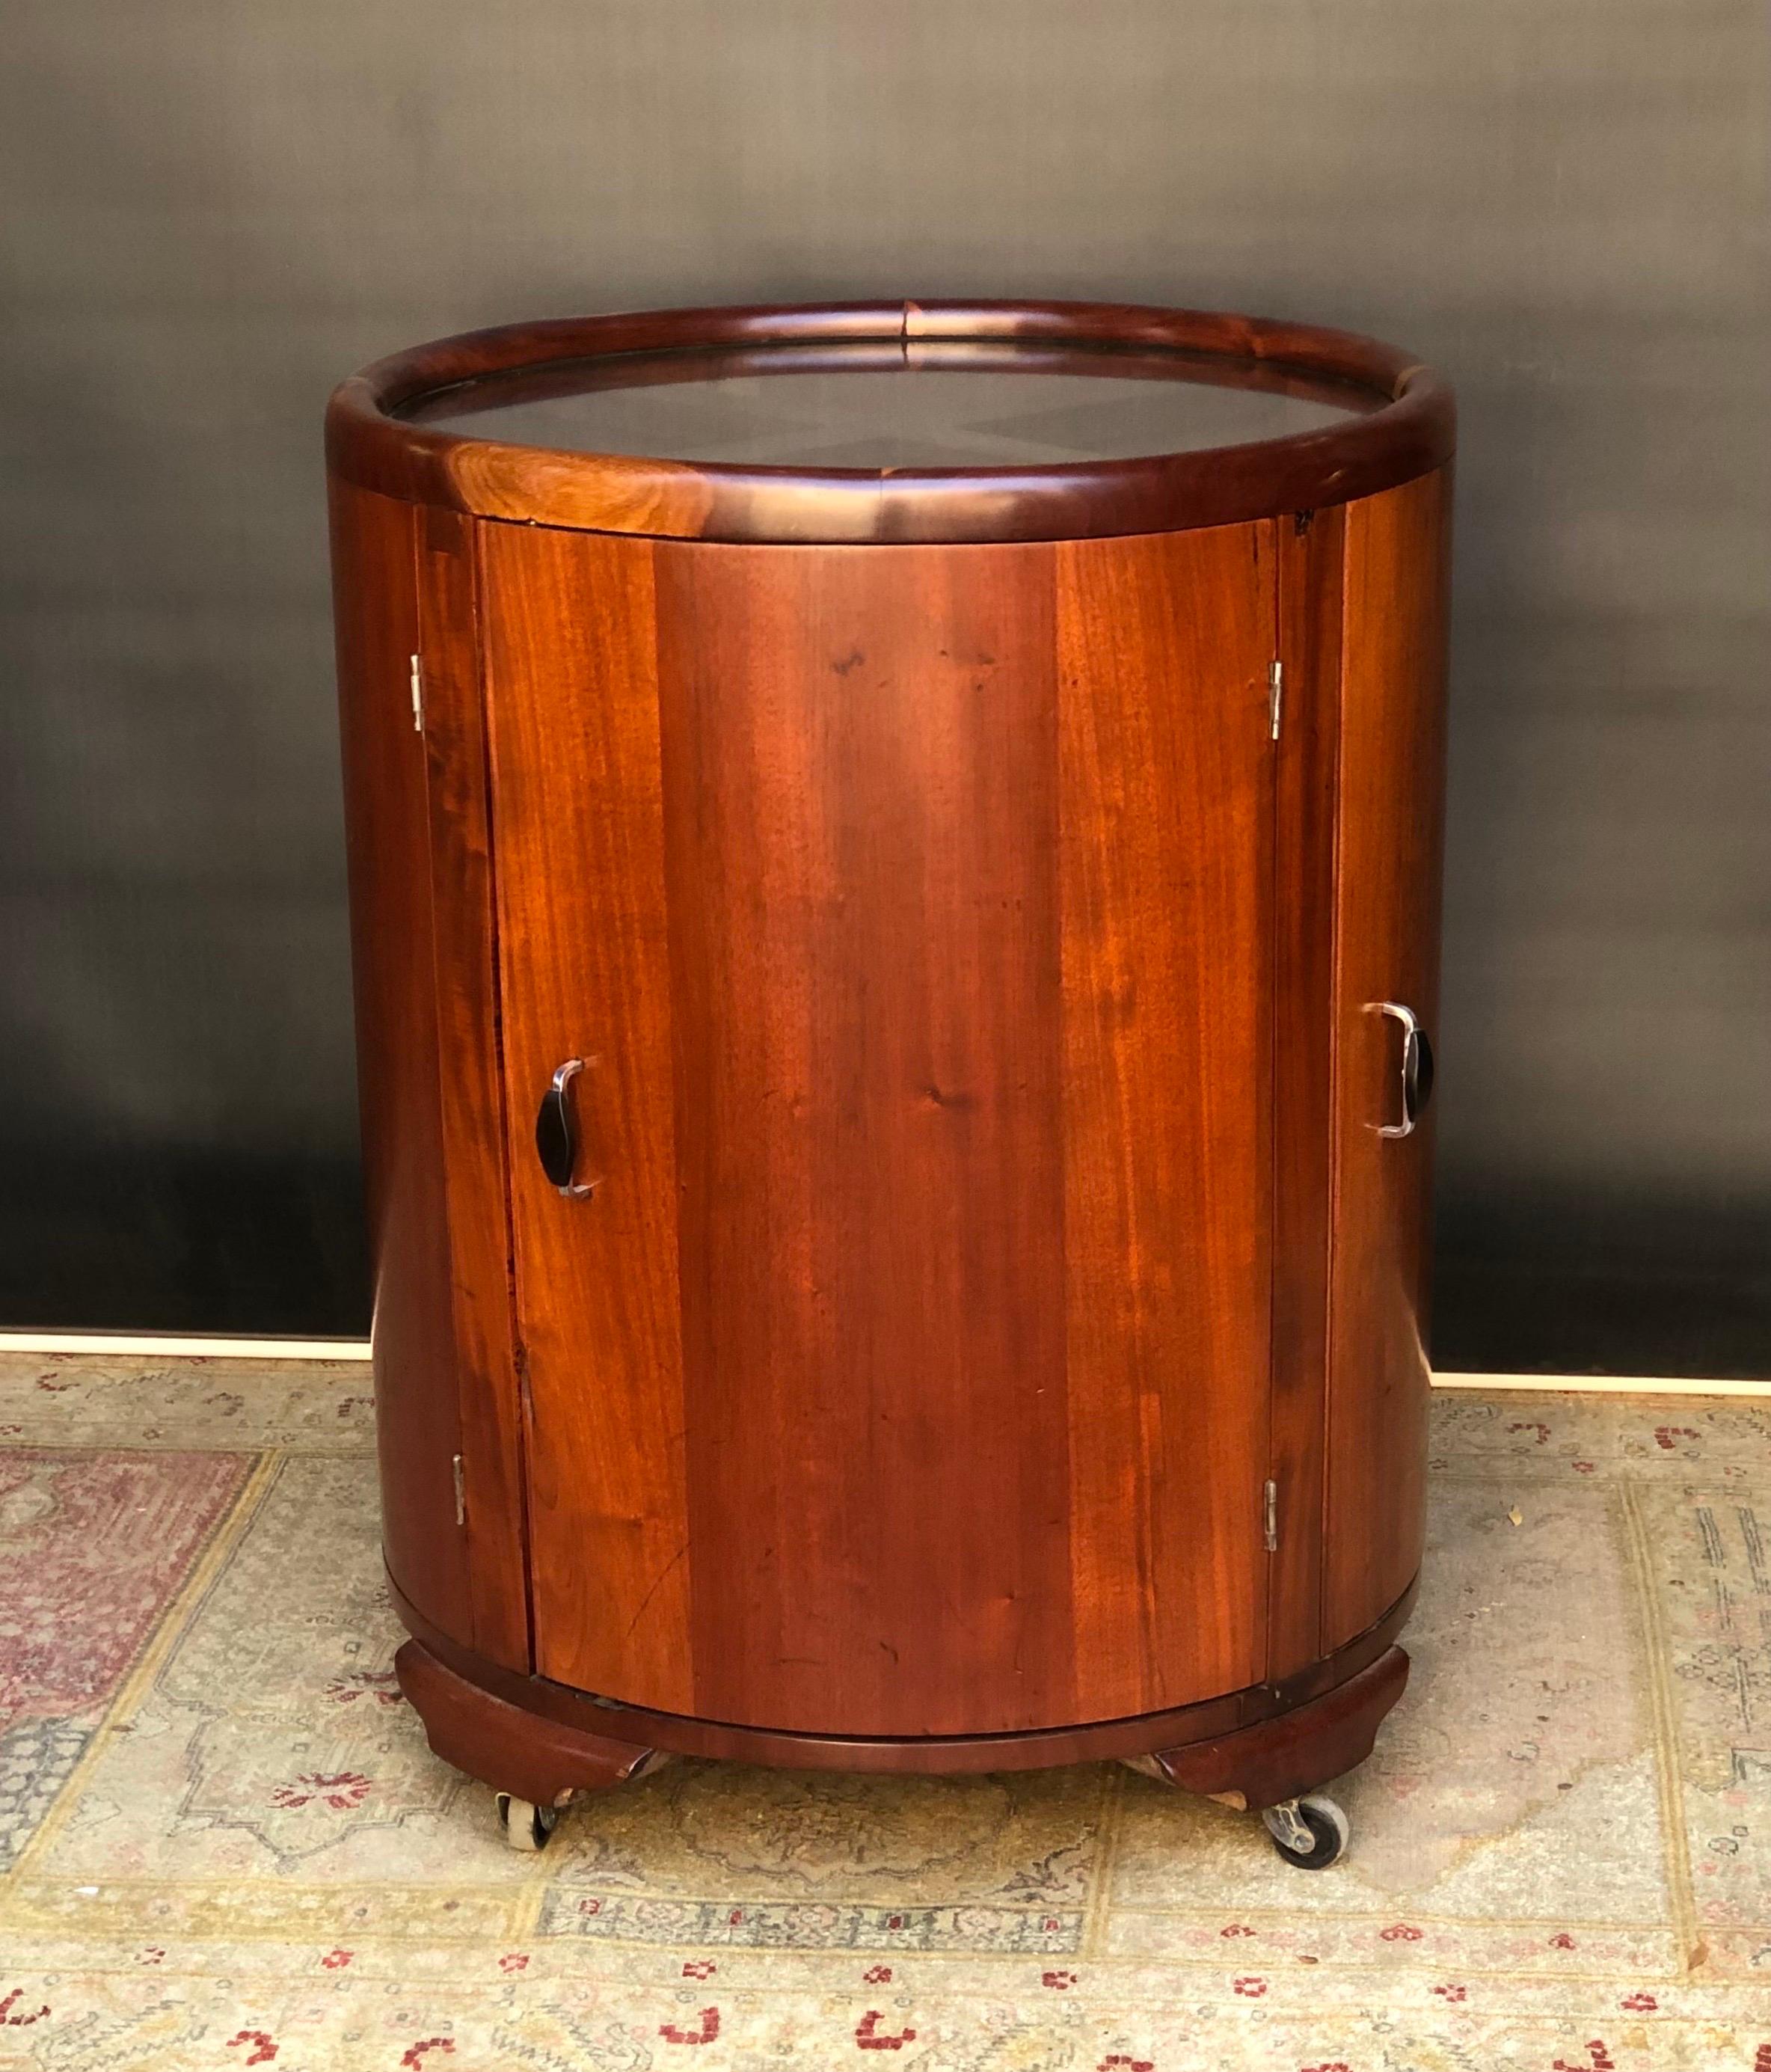 Jamaican Art Deco Round Bar/Cocktail Cabinet By Burnett Webster(circa.1934-1939) For Sale 9